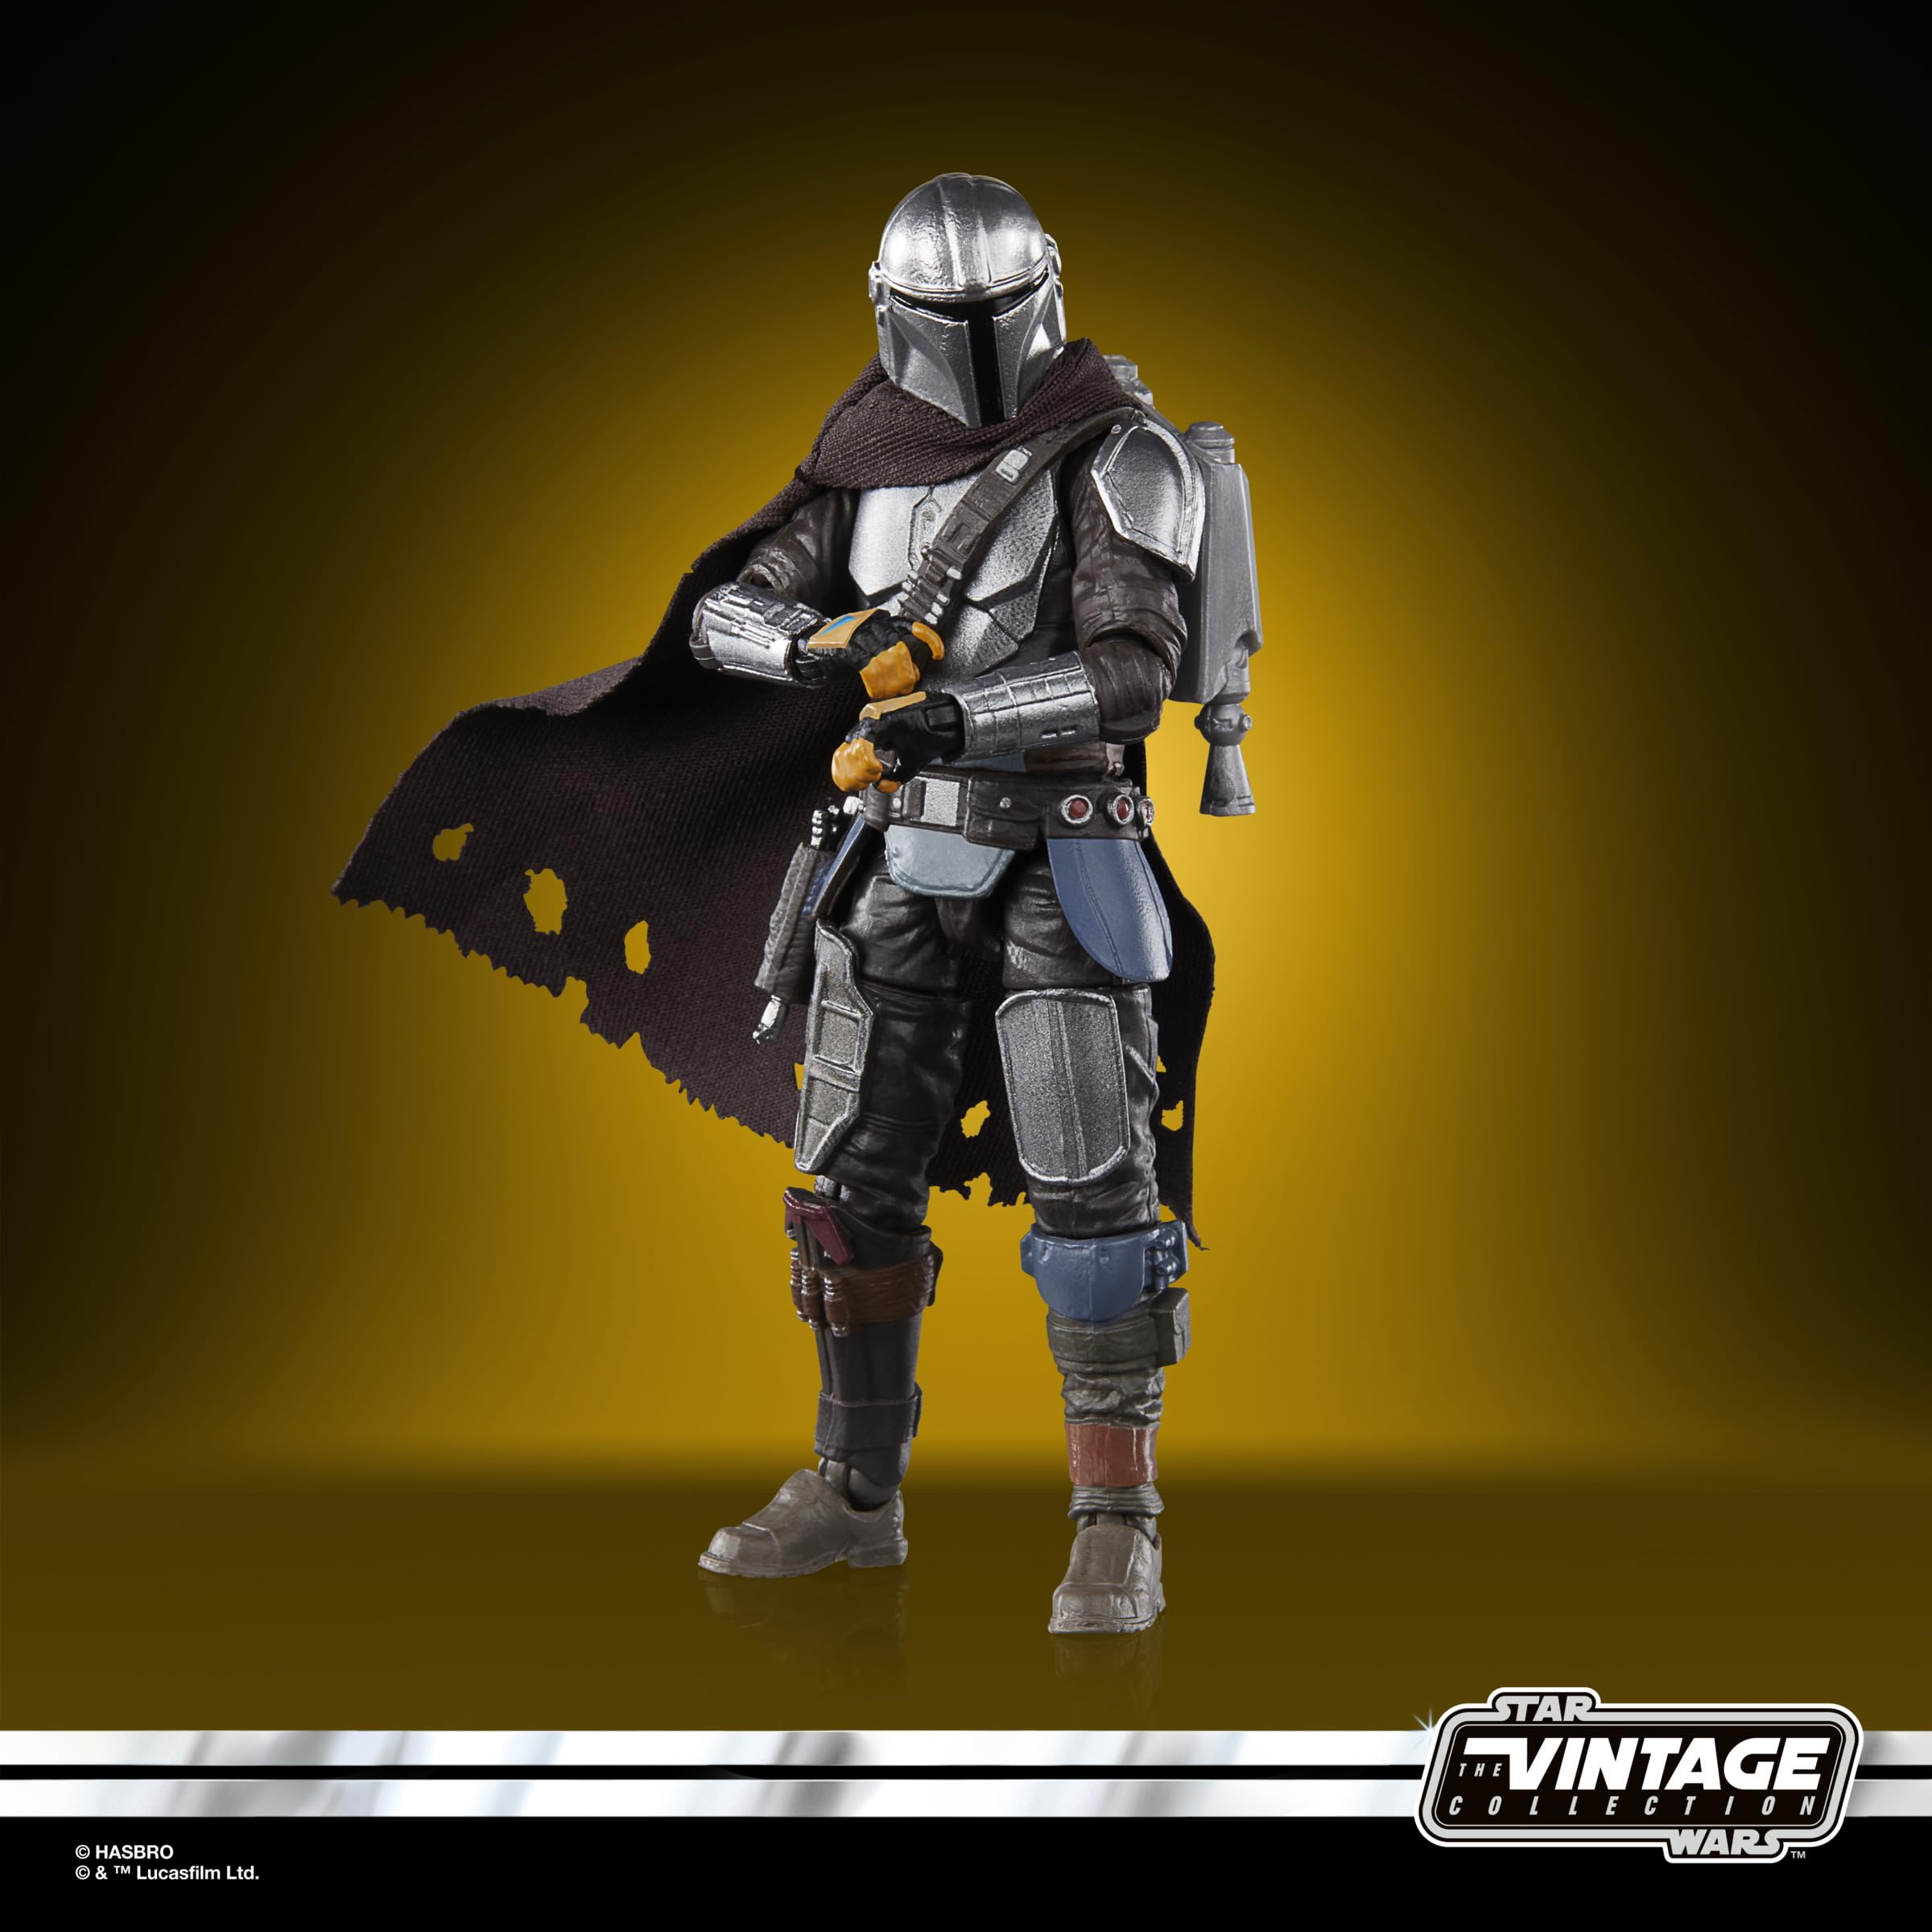 STAR WARS The Vintage Collection The Mandalorian (Mines of Mandalore), The Mandalorian 3.75-Inch Collectible Action Figure